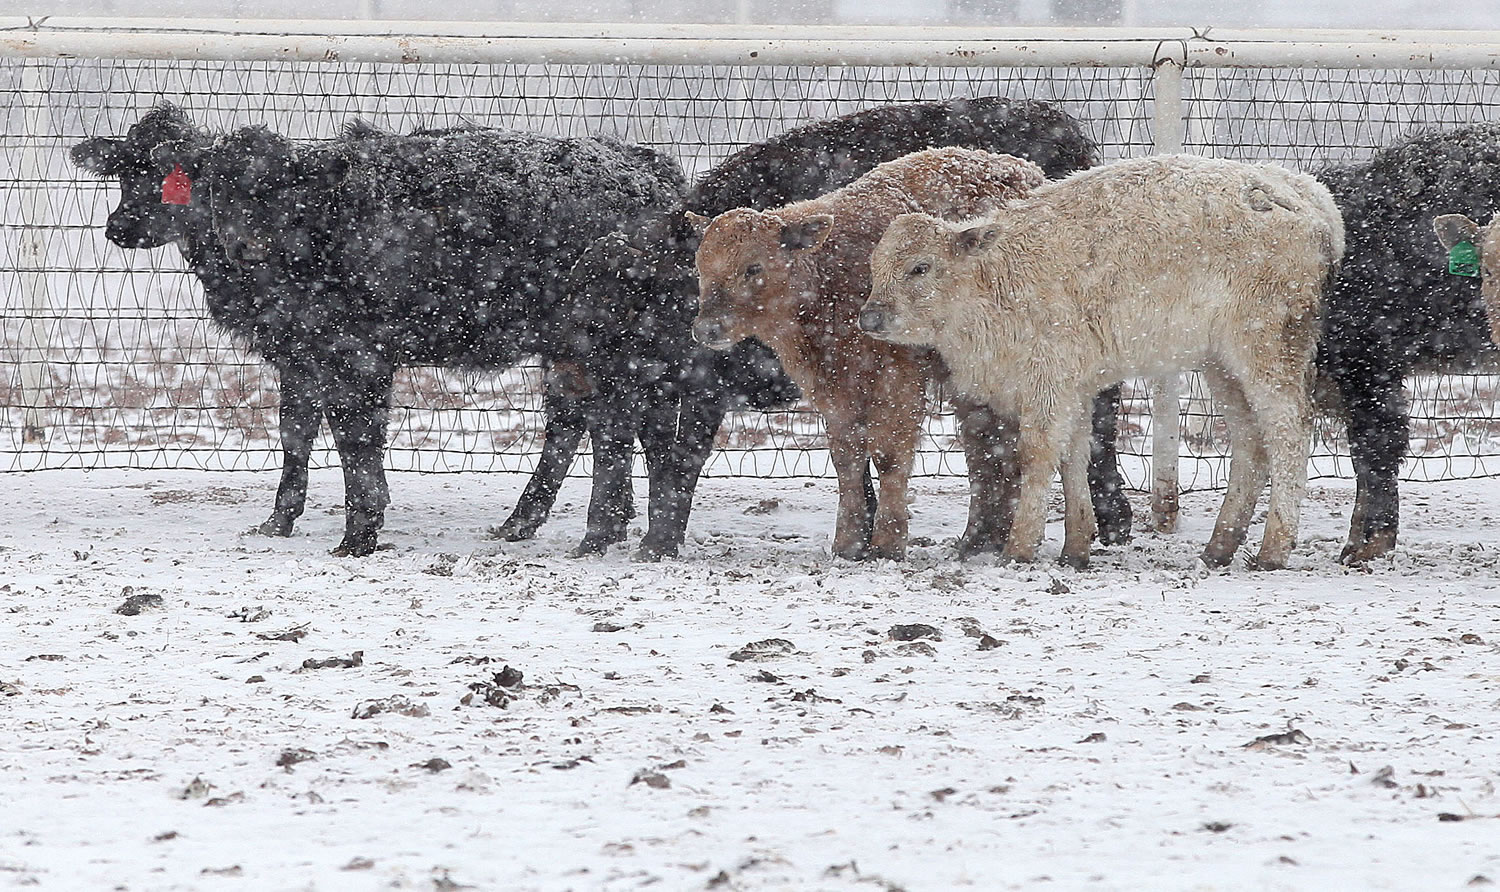 Cattle stand in blizzard conditions in Lubbock, Texas, on Monday. State troopers are unable to respond to calls for assistance and National Guard units are mobilizing as a winter storm blankets the central Plains with a foot of snow in some places.